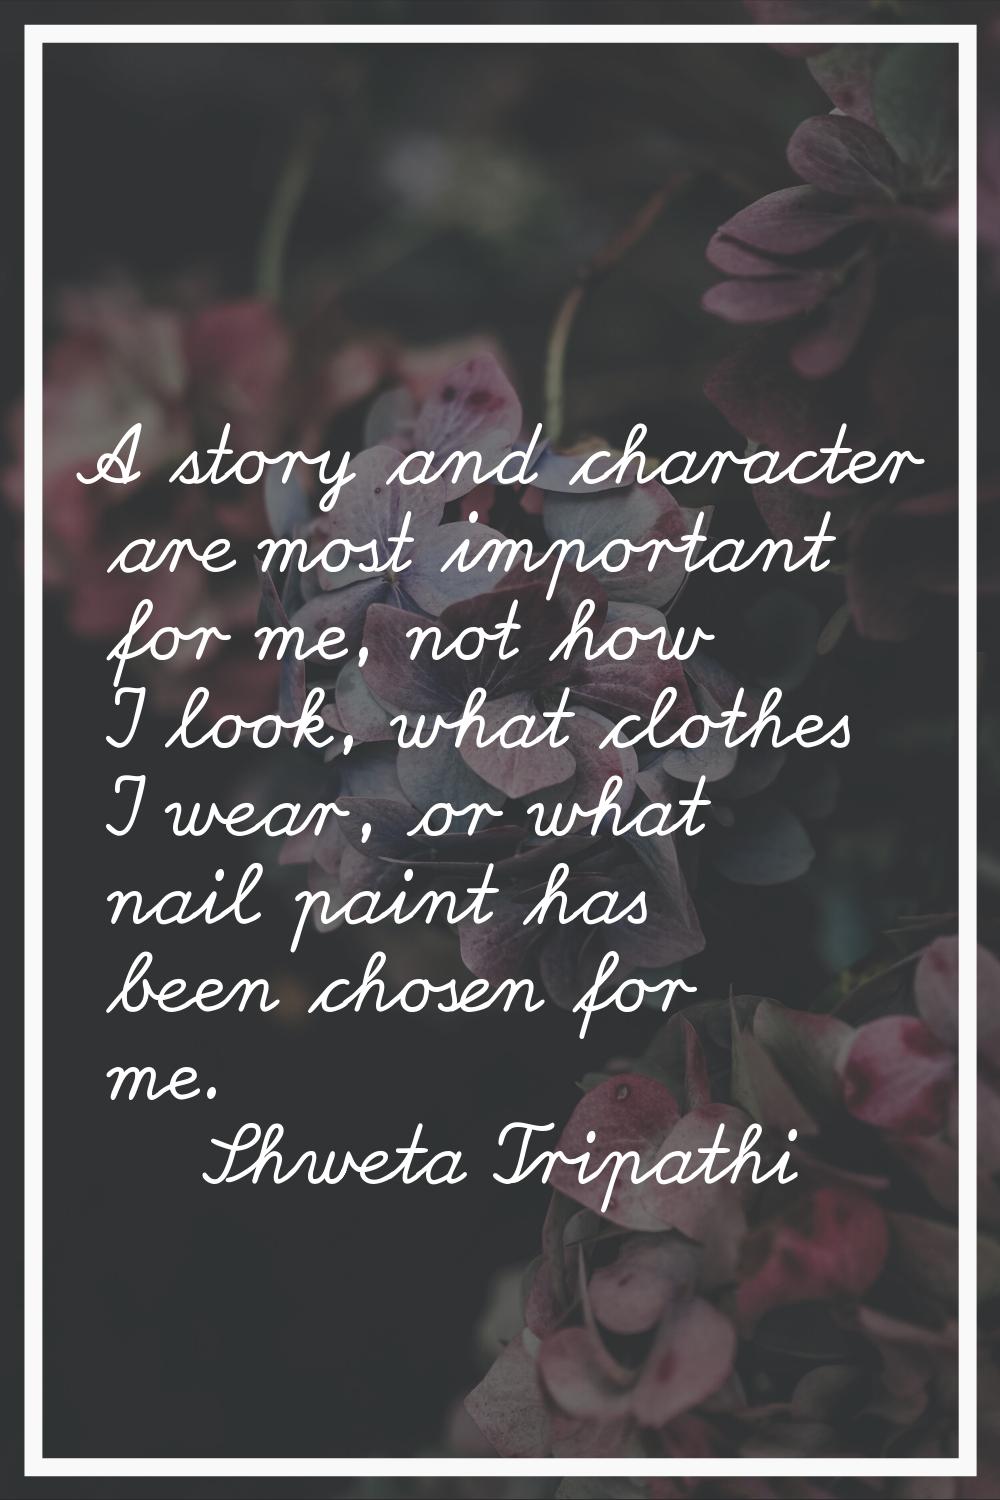 A story and character are most important for me, not how I look, what clothes I wear, or what nail 